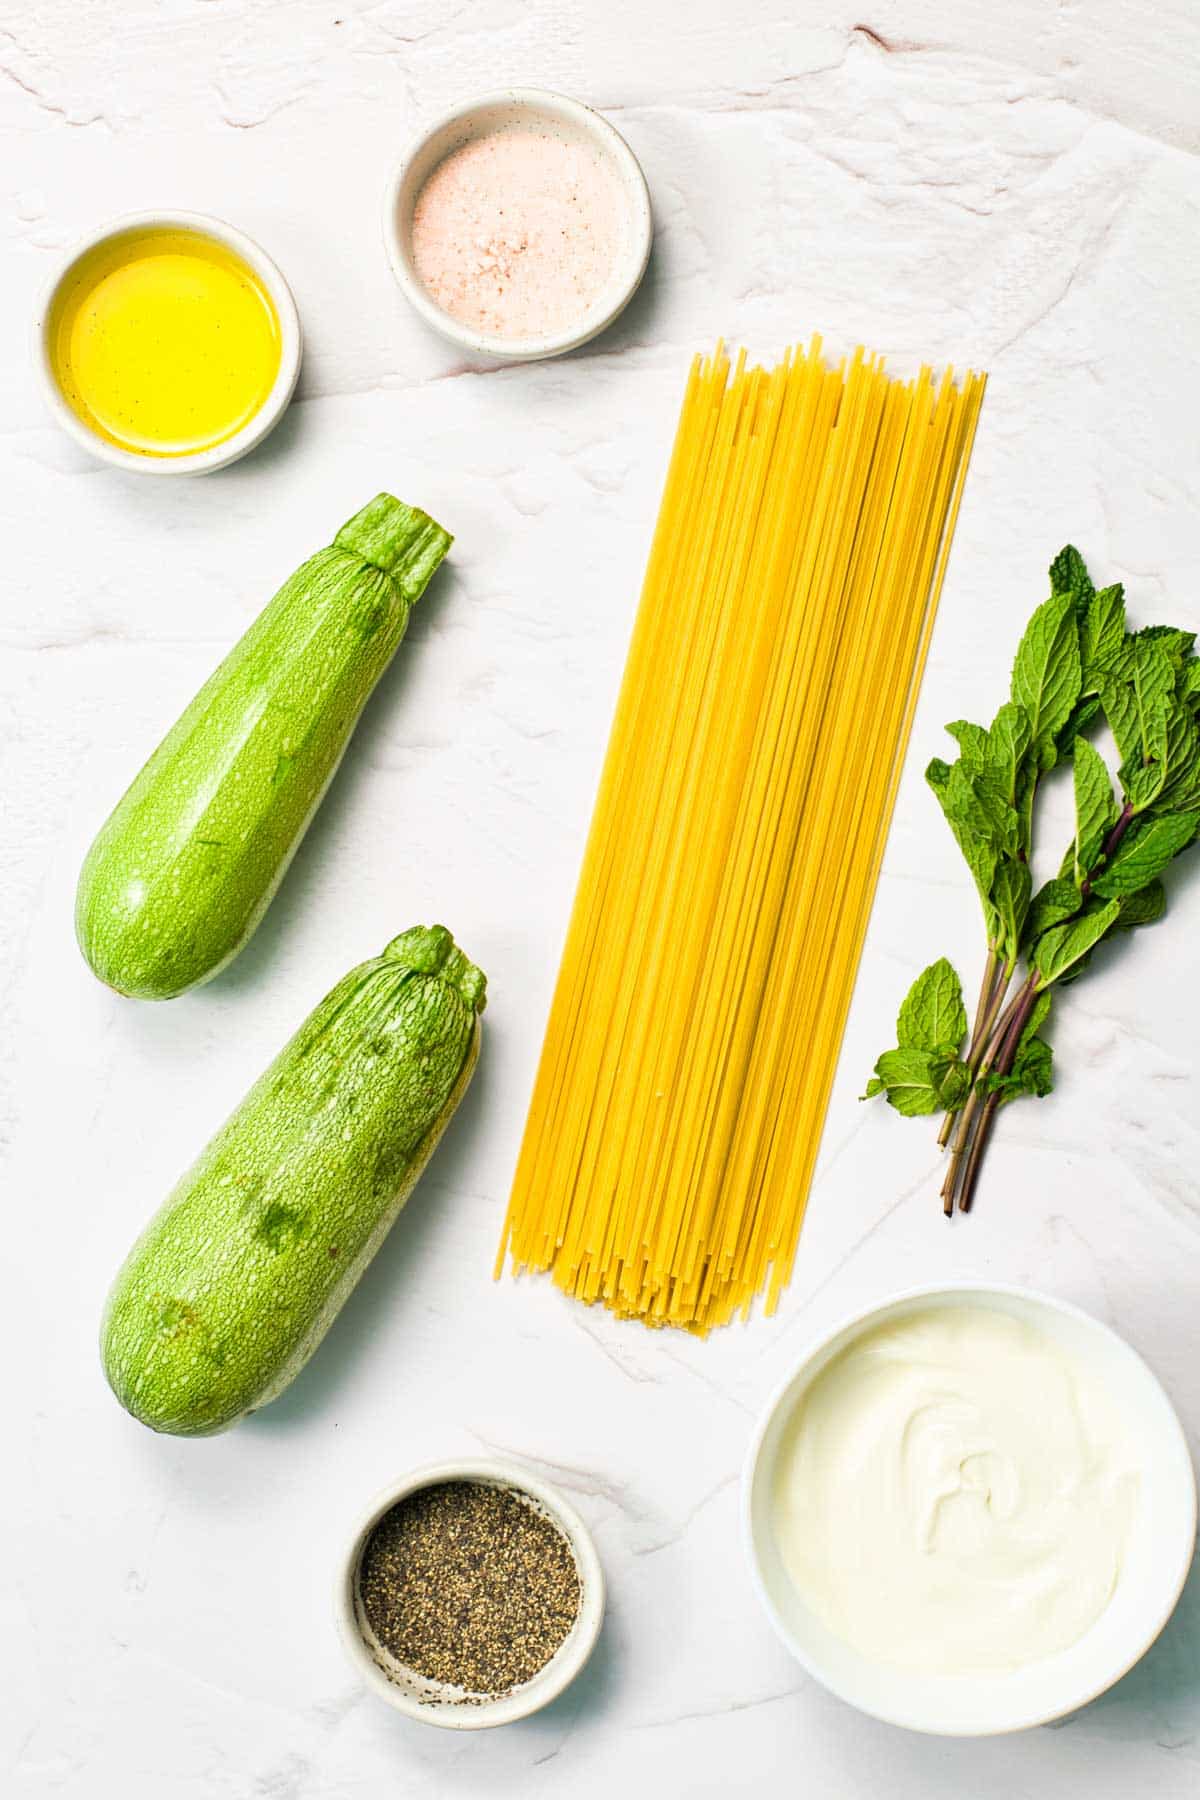 zucchini and pasta with seasonings on counter